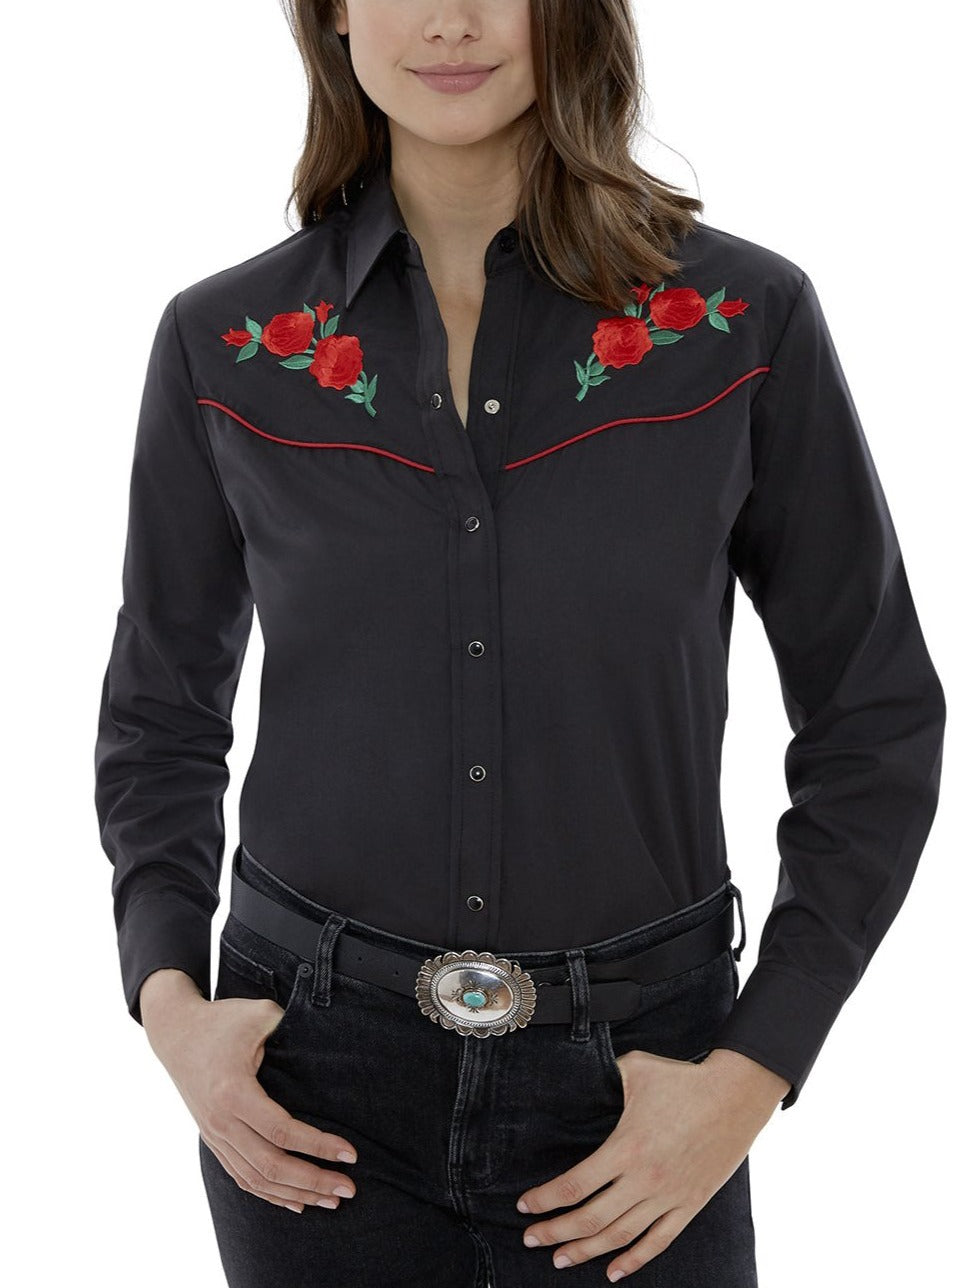 black and red rose shirt